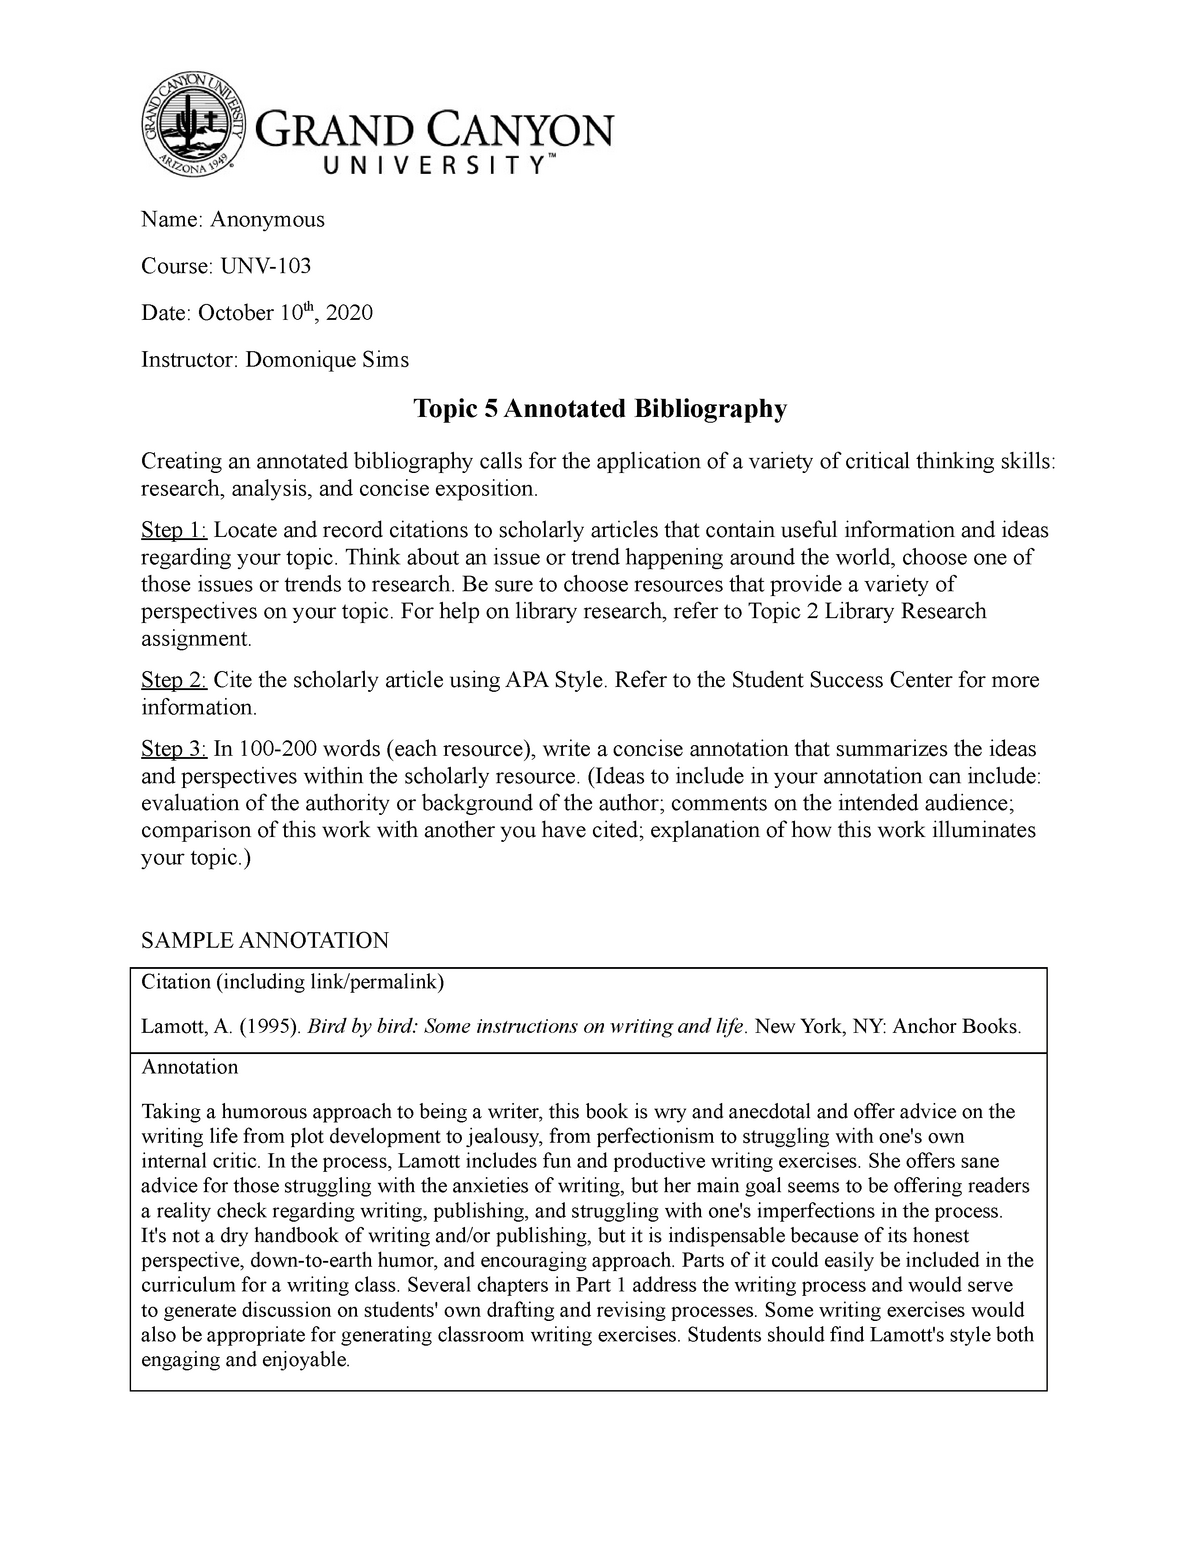 annotated bibliography example gcu